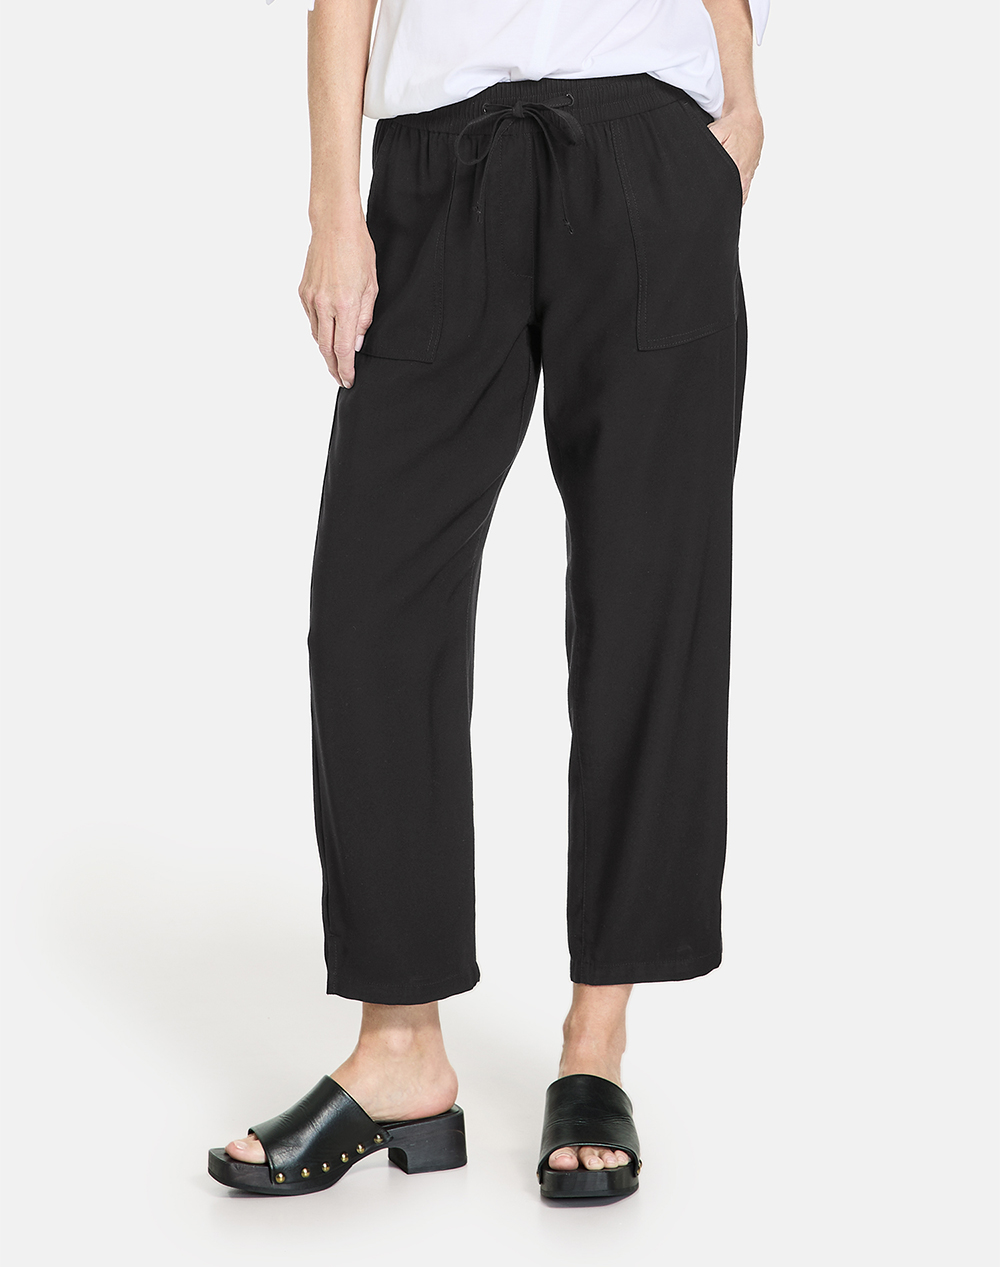 GERRY WEBER PANT LEISURE CROPPED 222068-66232-11000 Black 3810AGERR2000150_XR01606